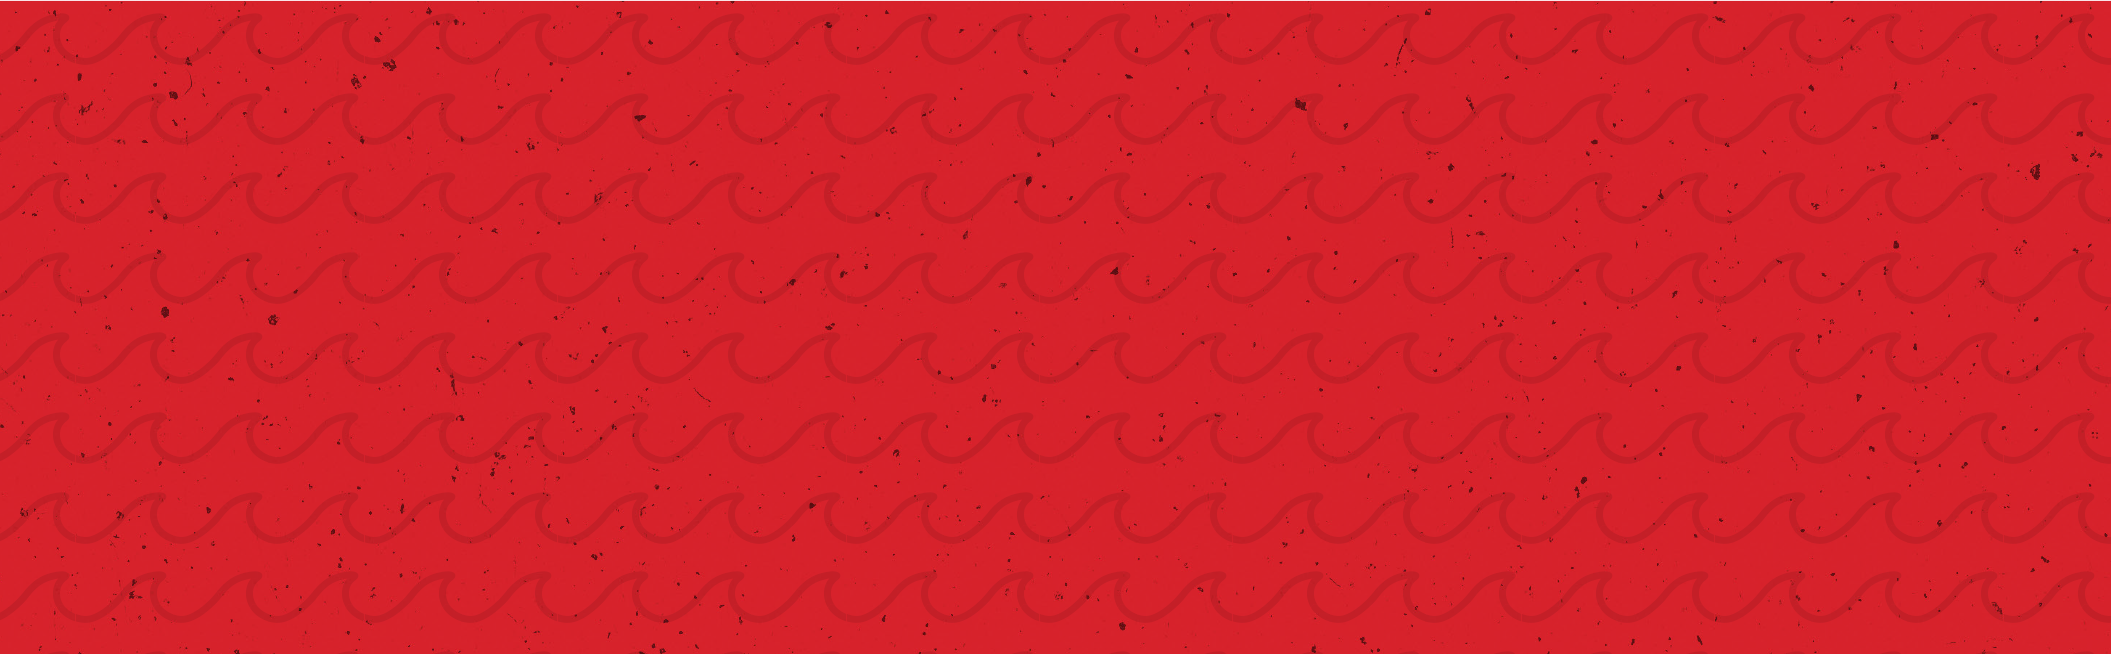 Red waves background.